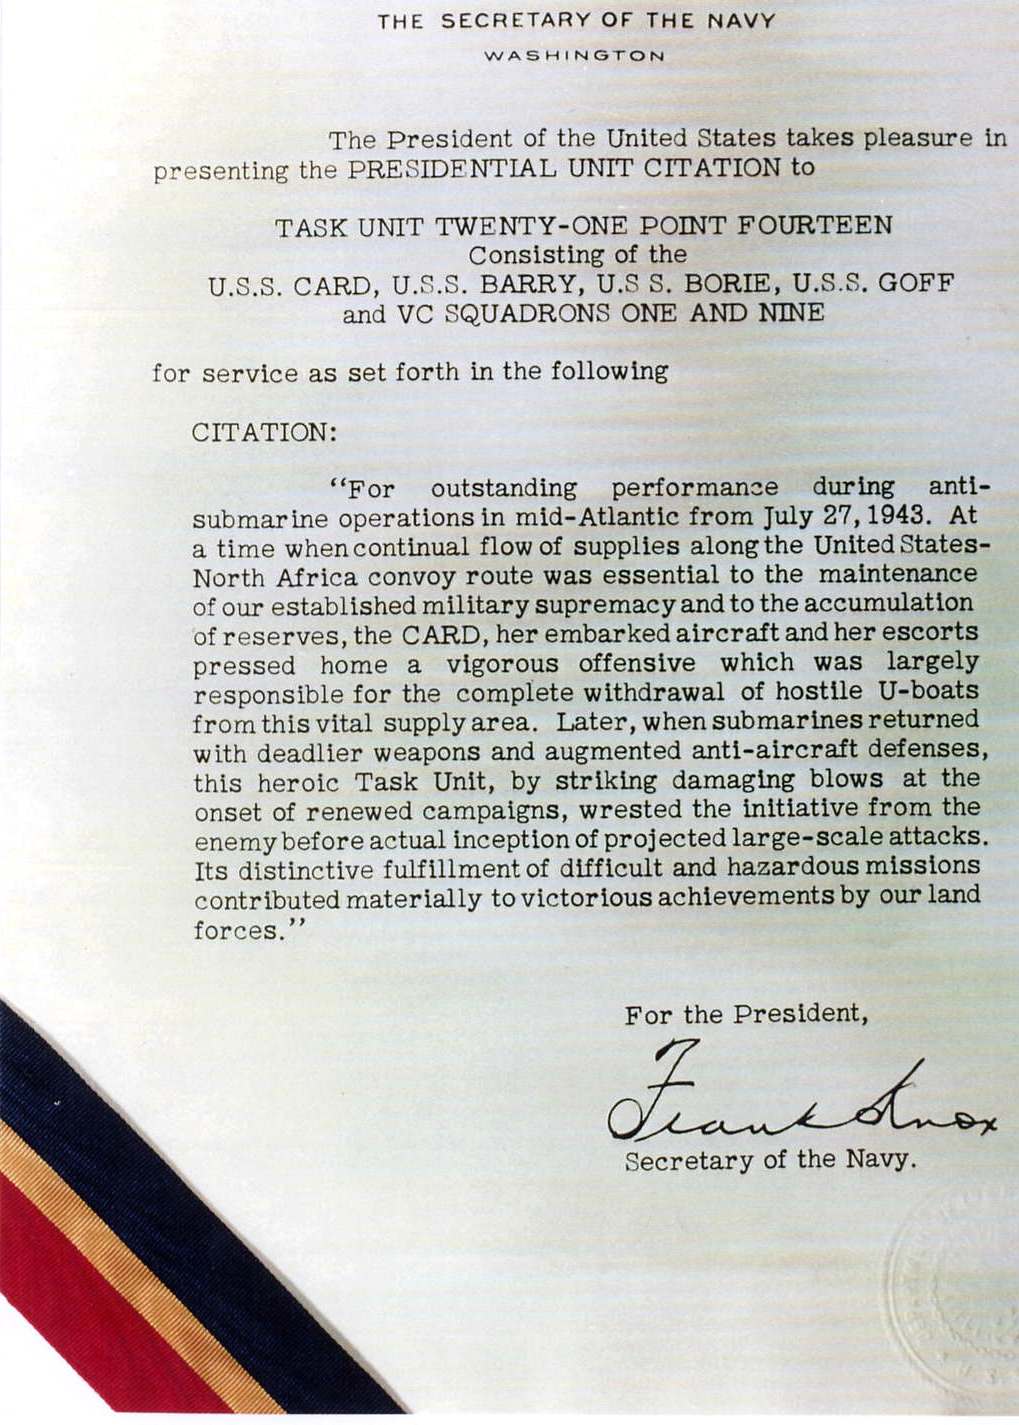 Text of the Presidential Unit Citation awarded to the ships and men of USS Card, Barry, Borie, Goff, and air units Composite Squadrons One and Nine for actions against German submarines in 1943.